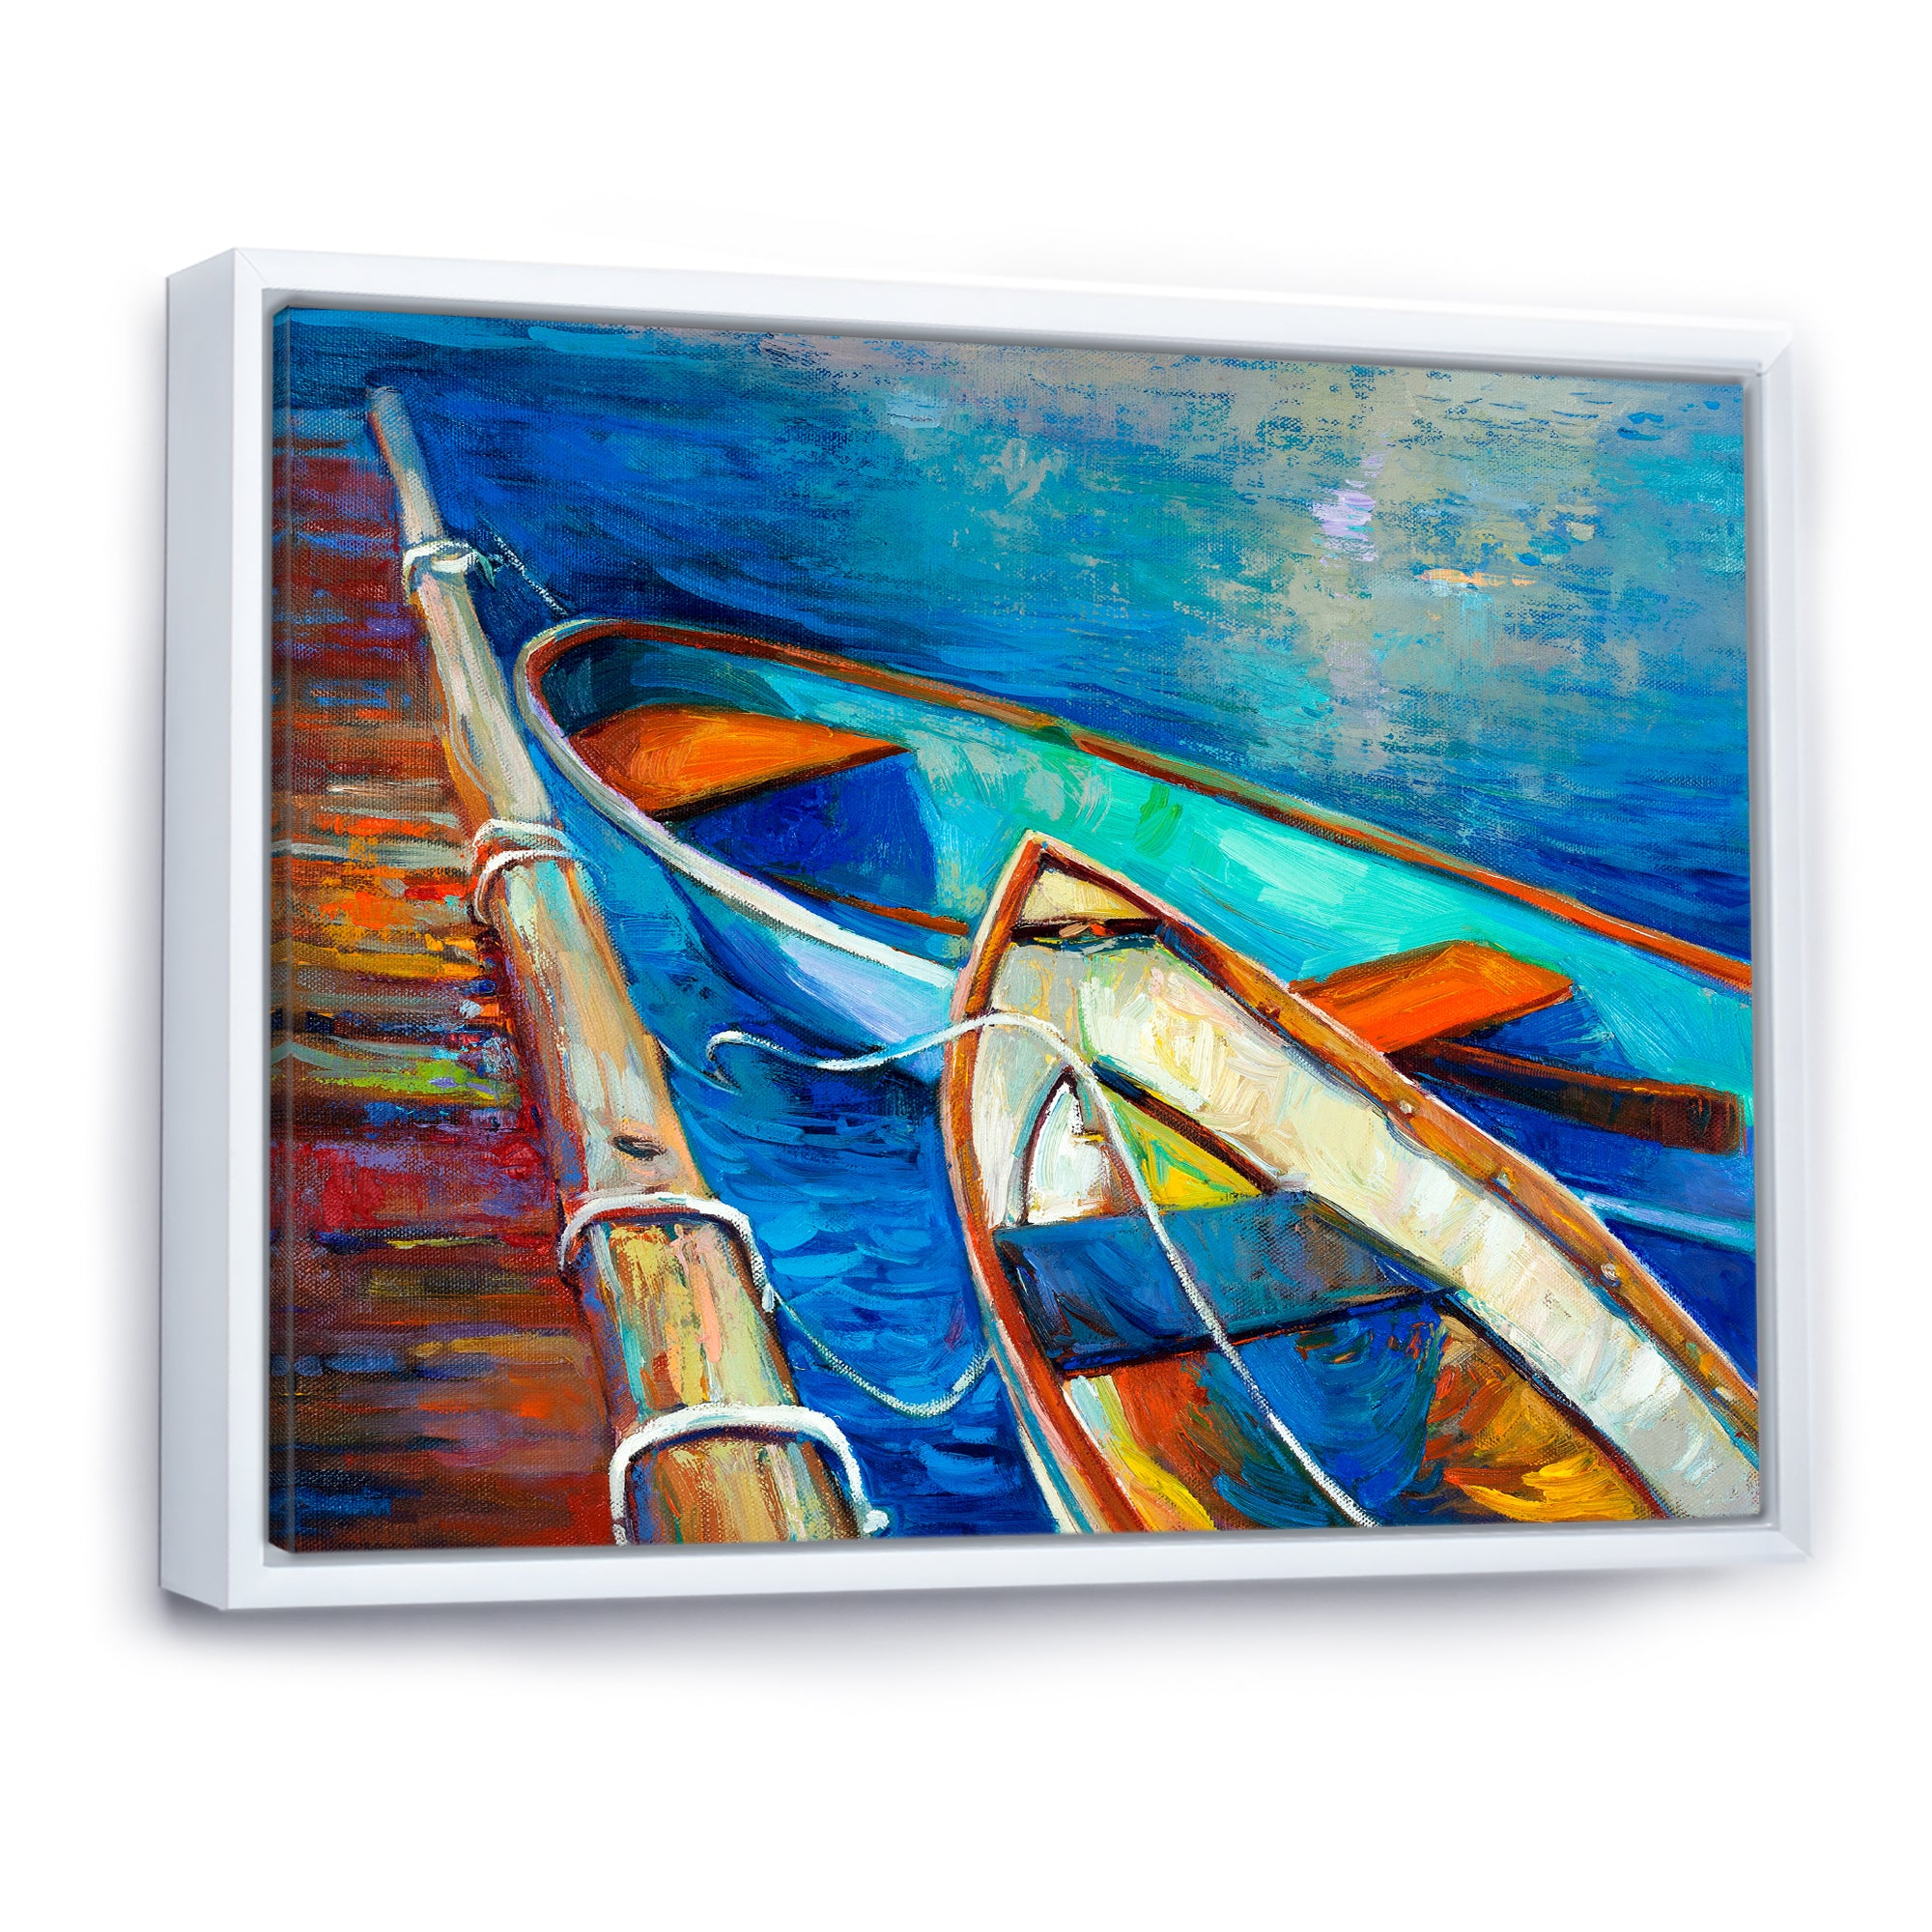 Boats and Pier in Blue Shade